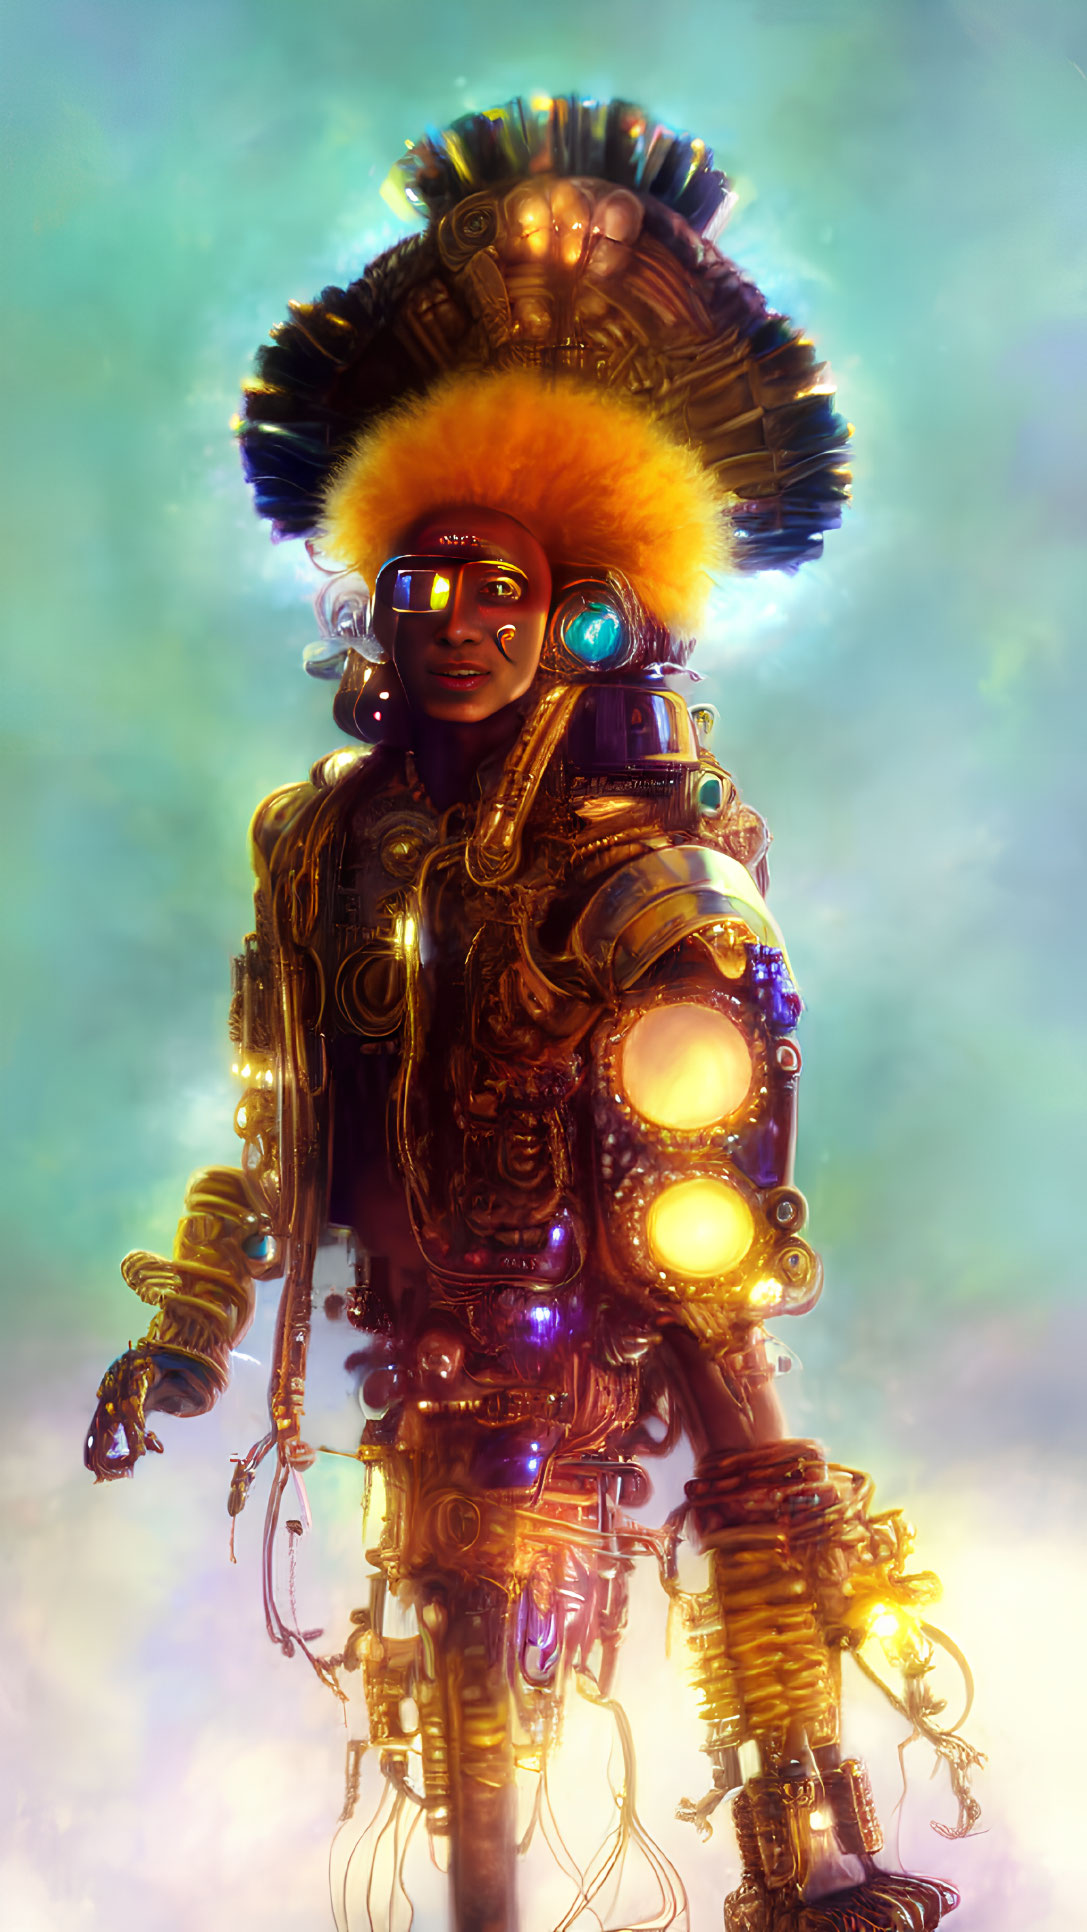 Colorful digital artwork: Person in futuristic suit with glowing elements and feathered headdress on dreamy